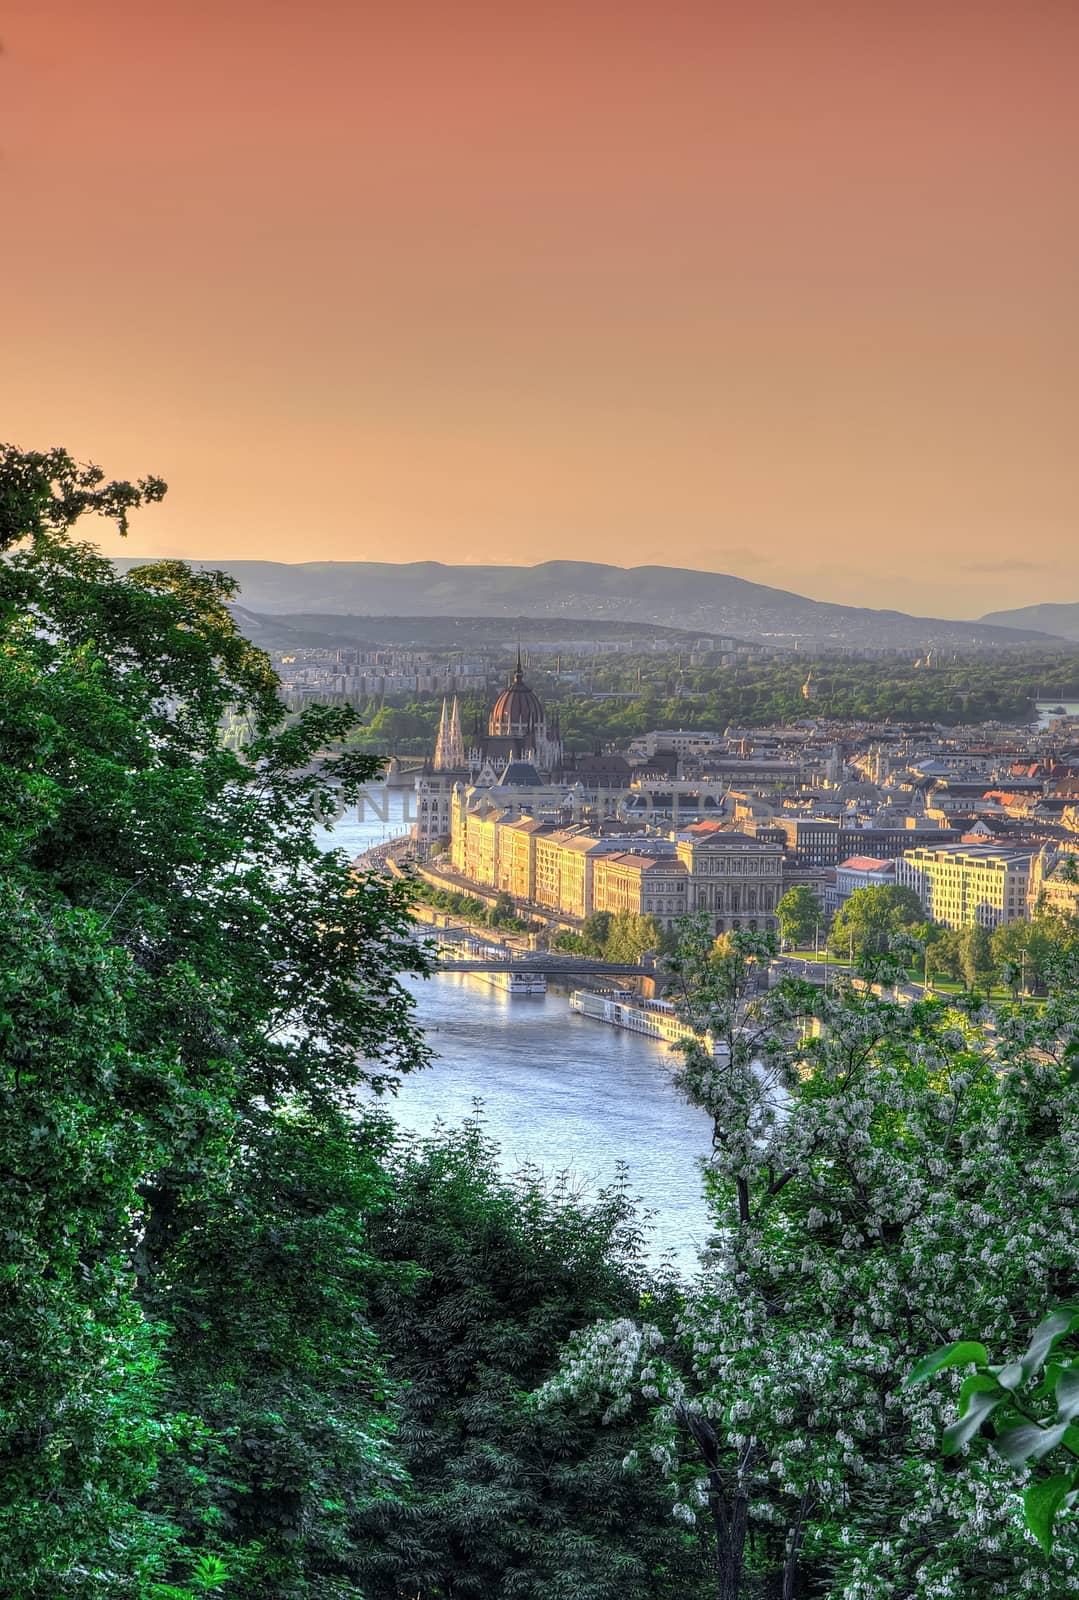 Budapest scene at dusk by anderm